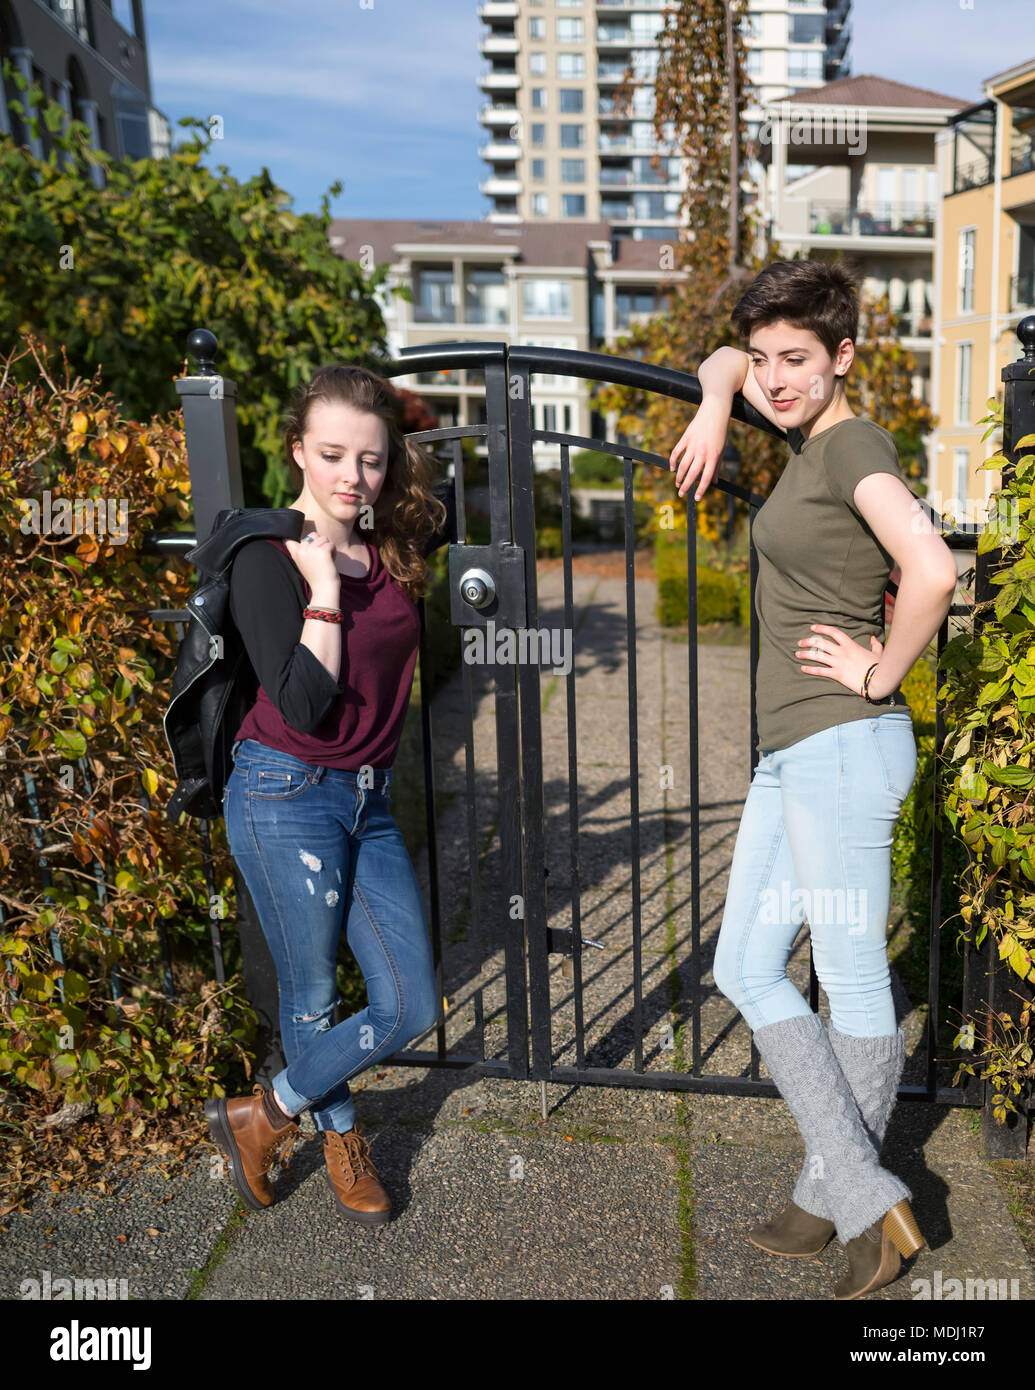 Two young women stand leaning against a metal gate looking confident and cool with housing in the background Stock Photo